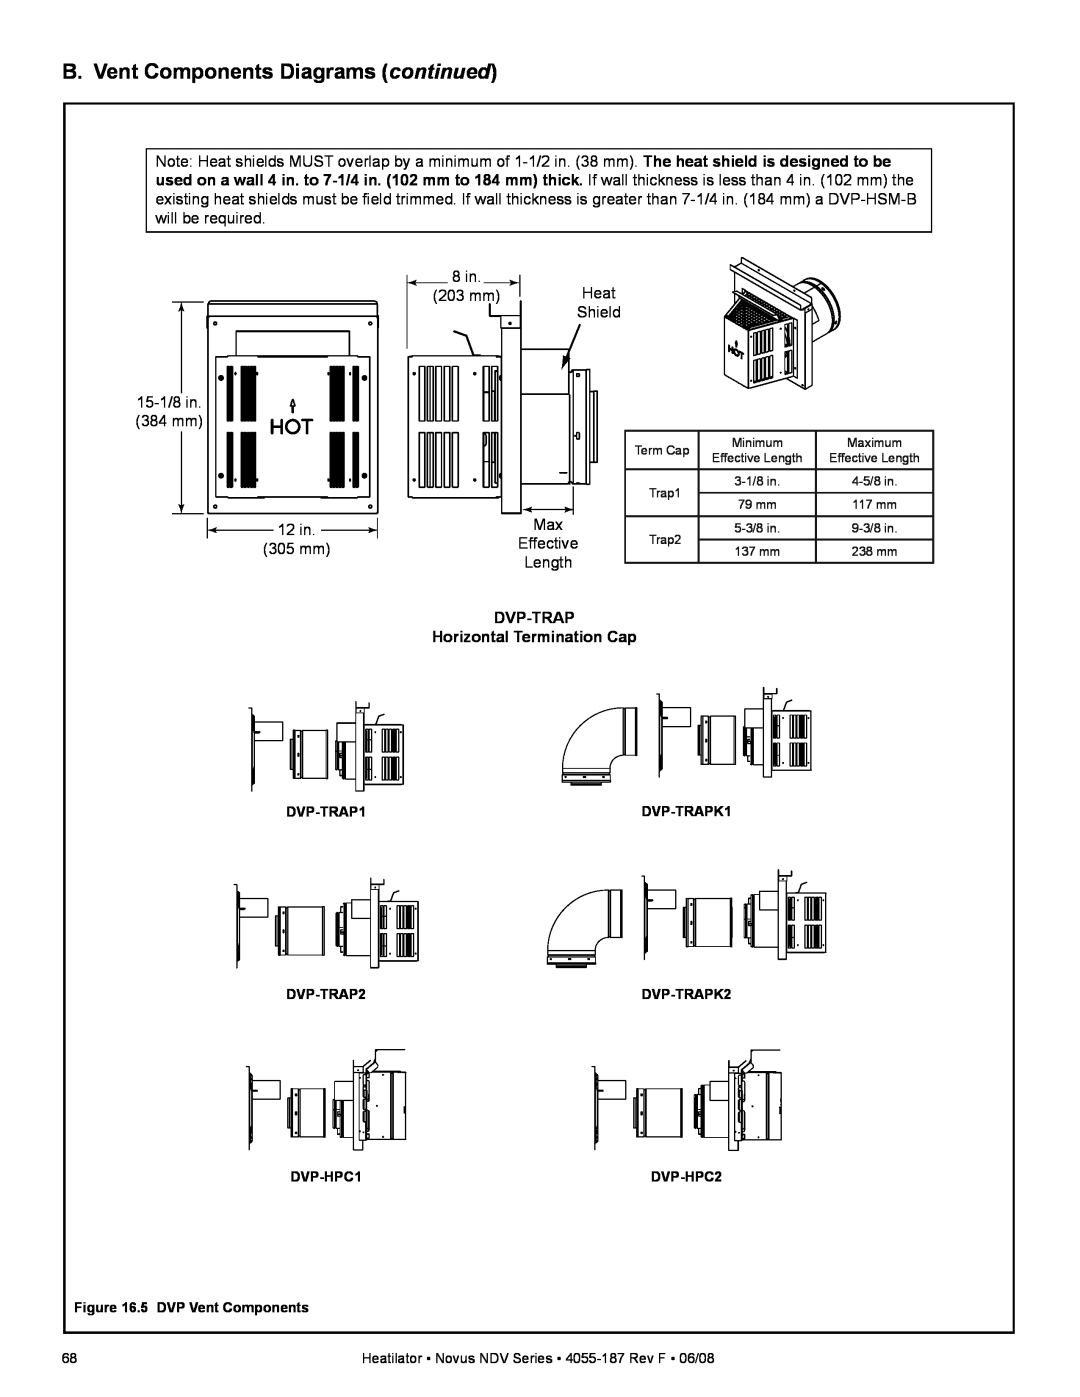 Hearth and Home Technologies NDV4842I, NDV4236IL, NDV3630 B. Vent Components Diagrams continued, 12 in, 305 mm, Effective 